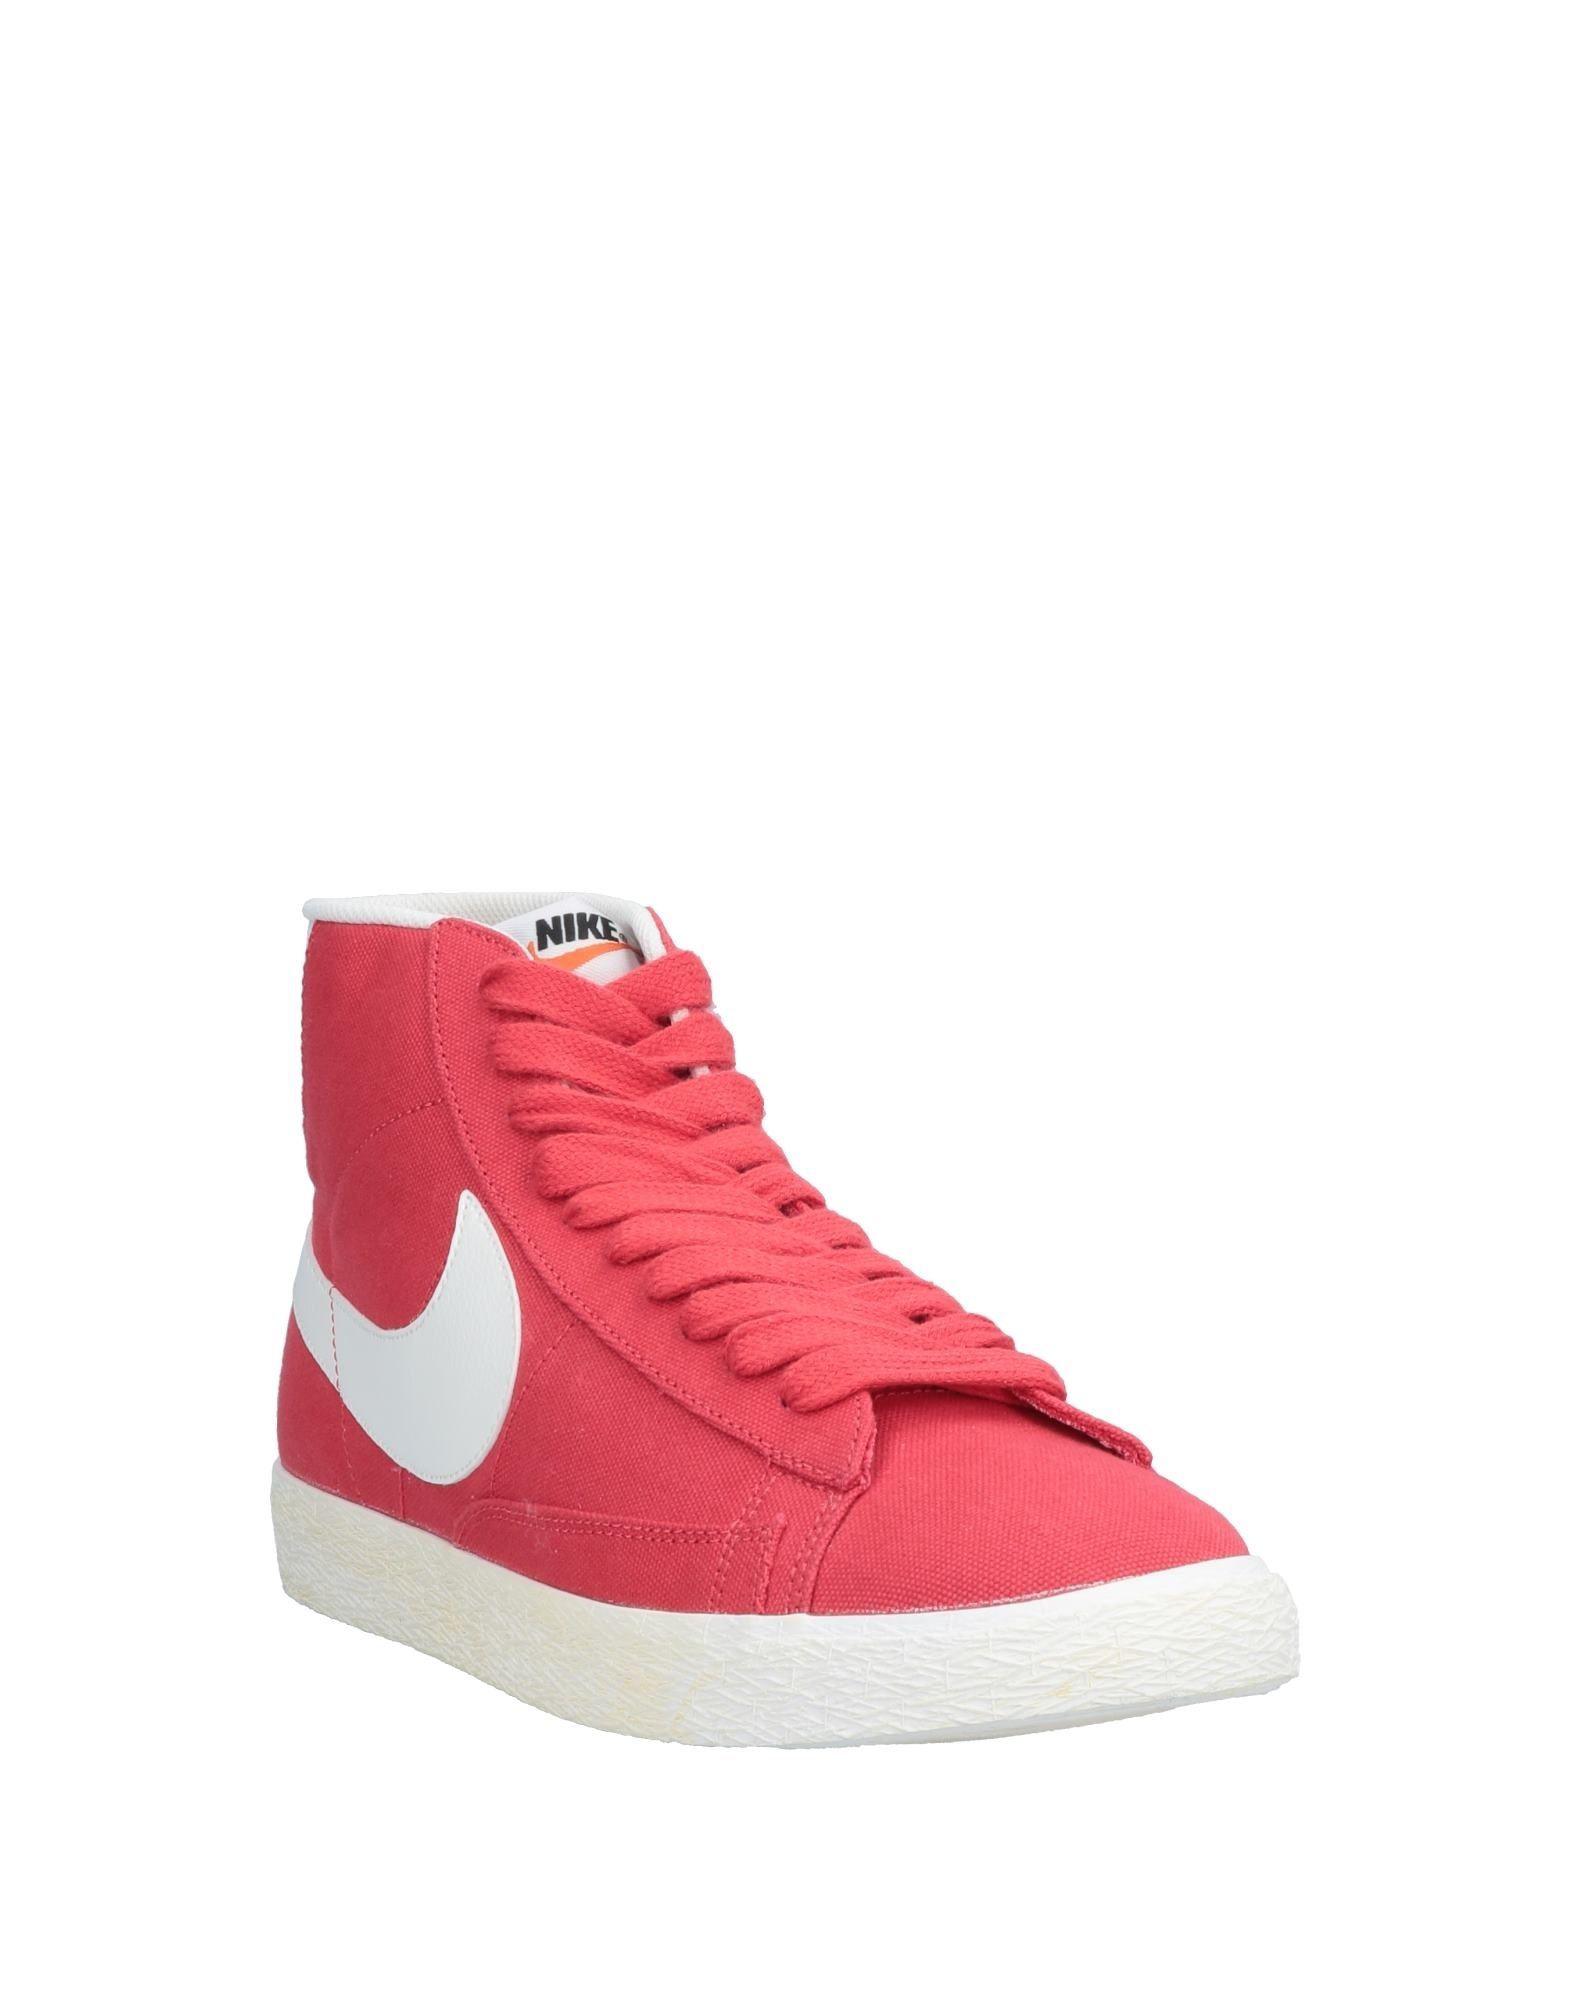 Nike Canvas High-tops & Sneakers in Red for Men - Lyst